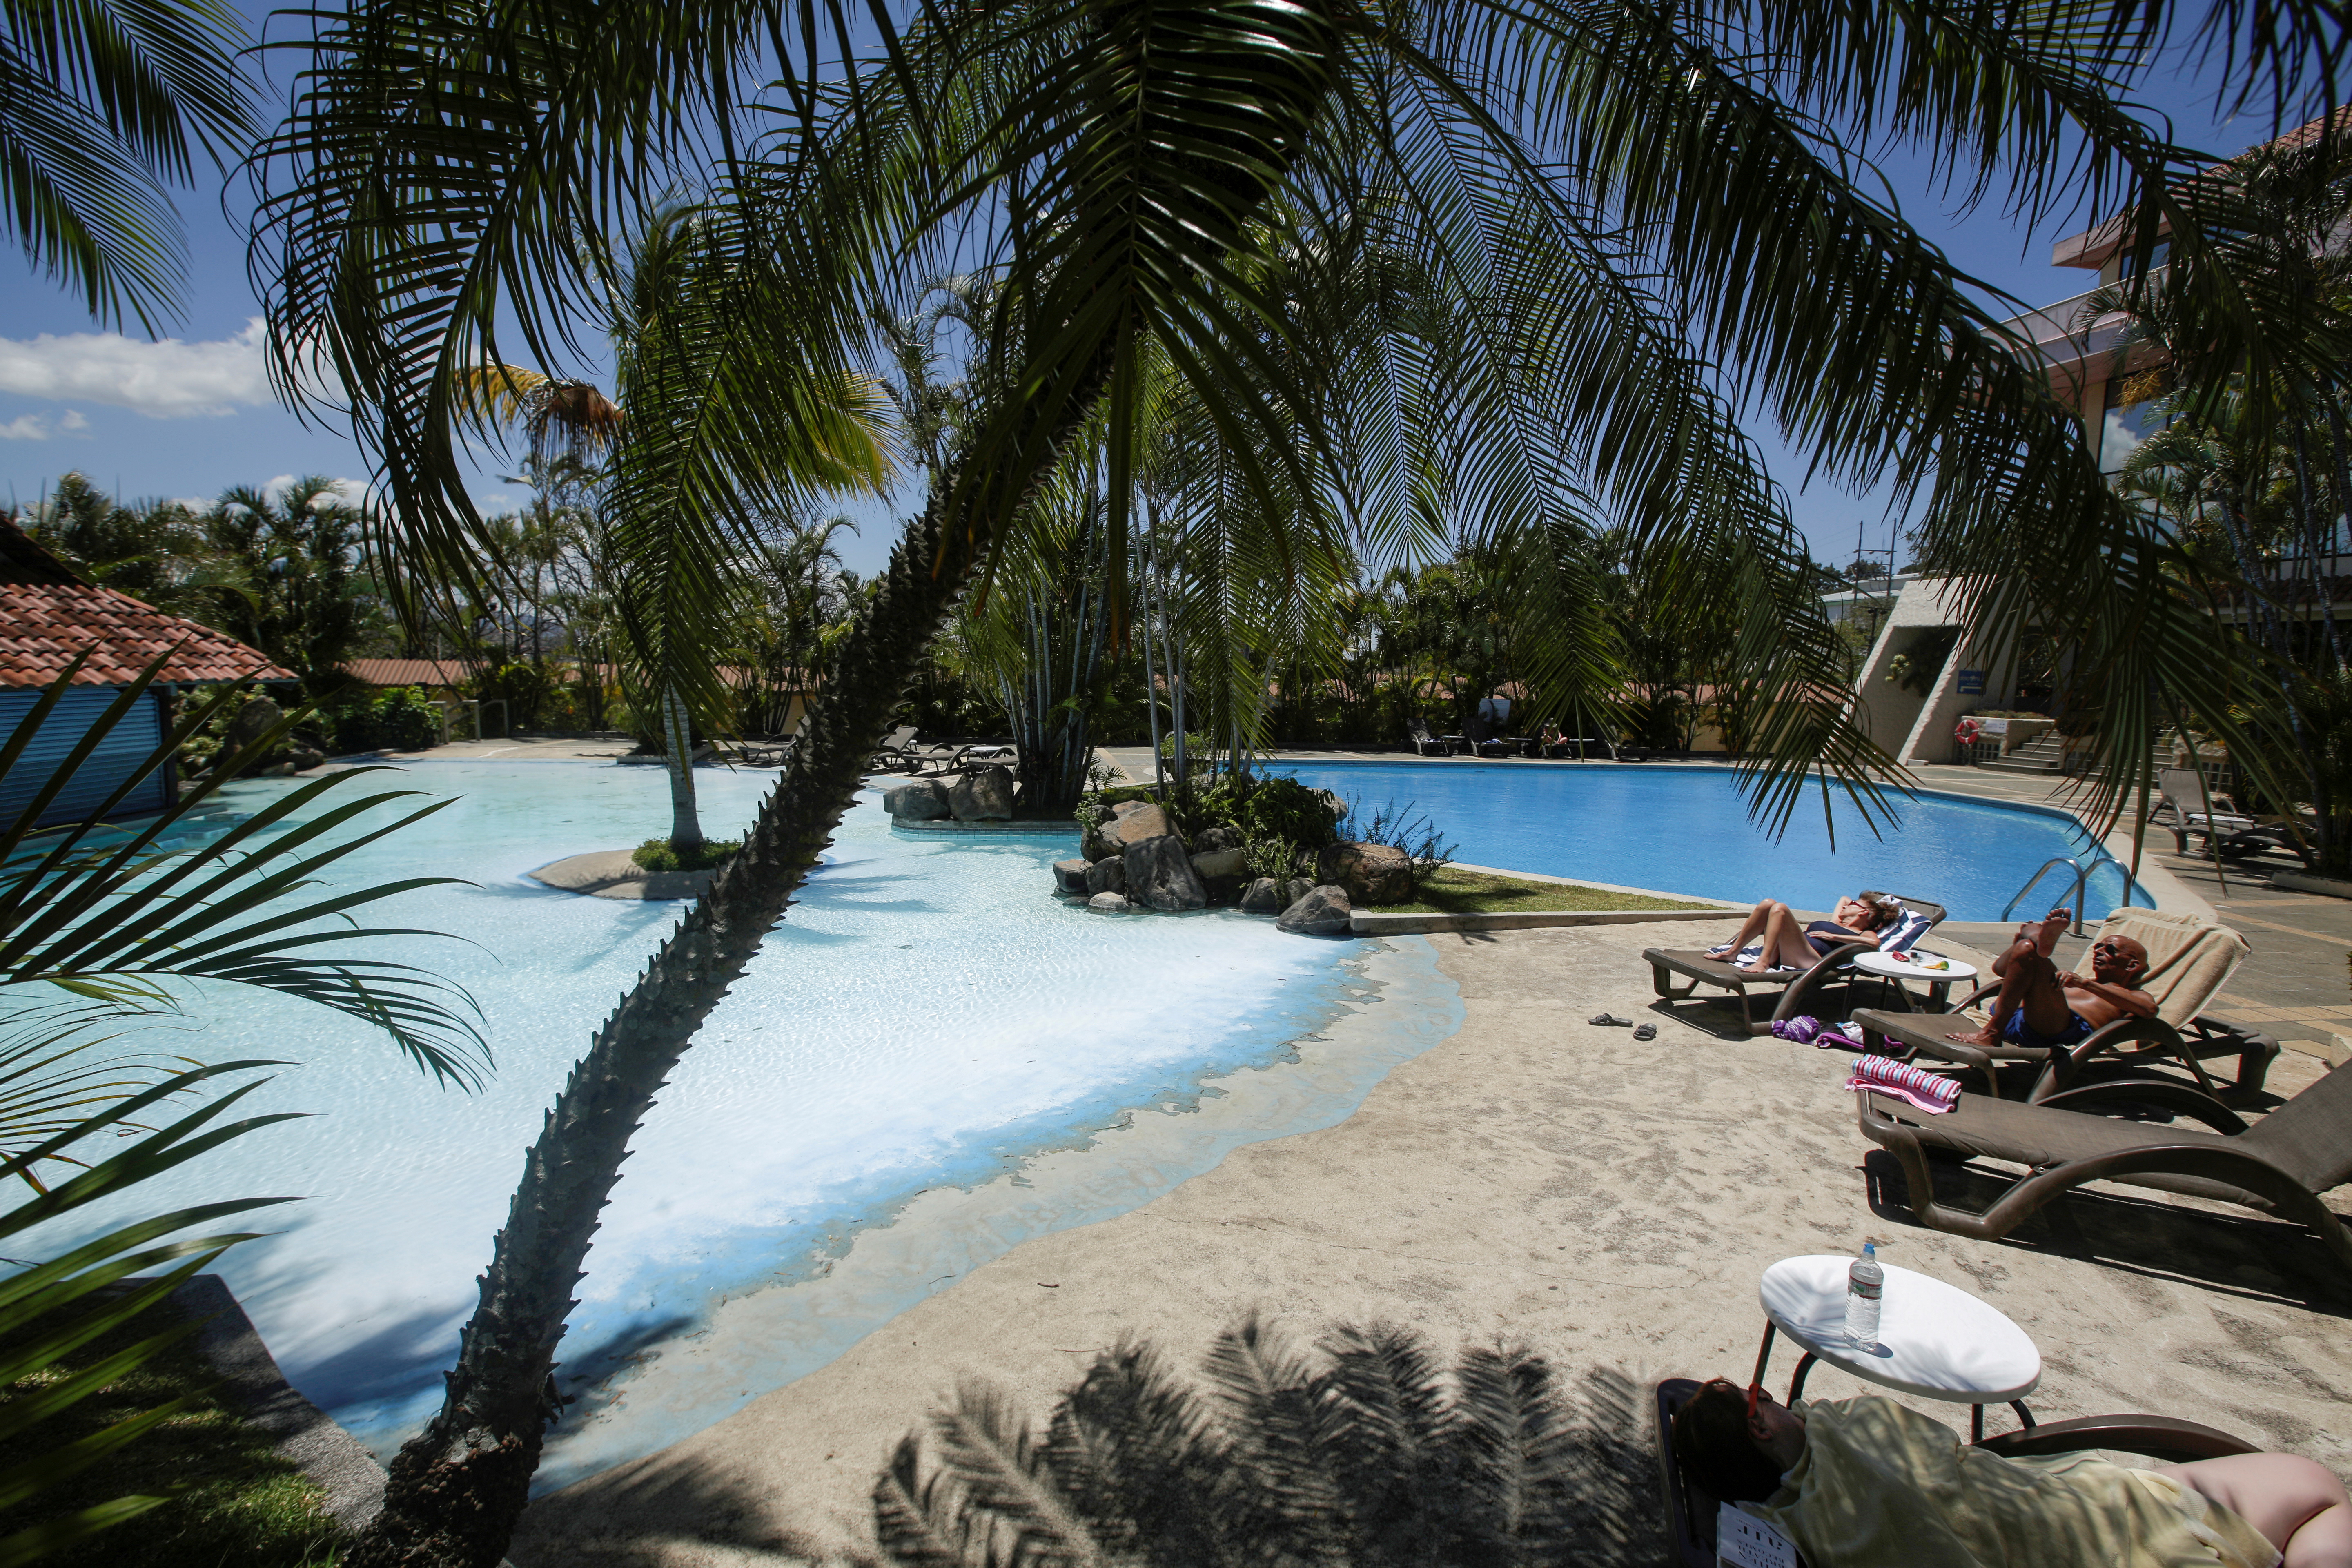 Tourists sunbathe near a pool in a hotel, as Costa Rica tourism industry braces for coronavirus disease (COVID-19) outbreak, in Heredia